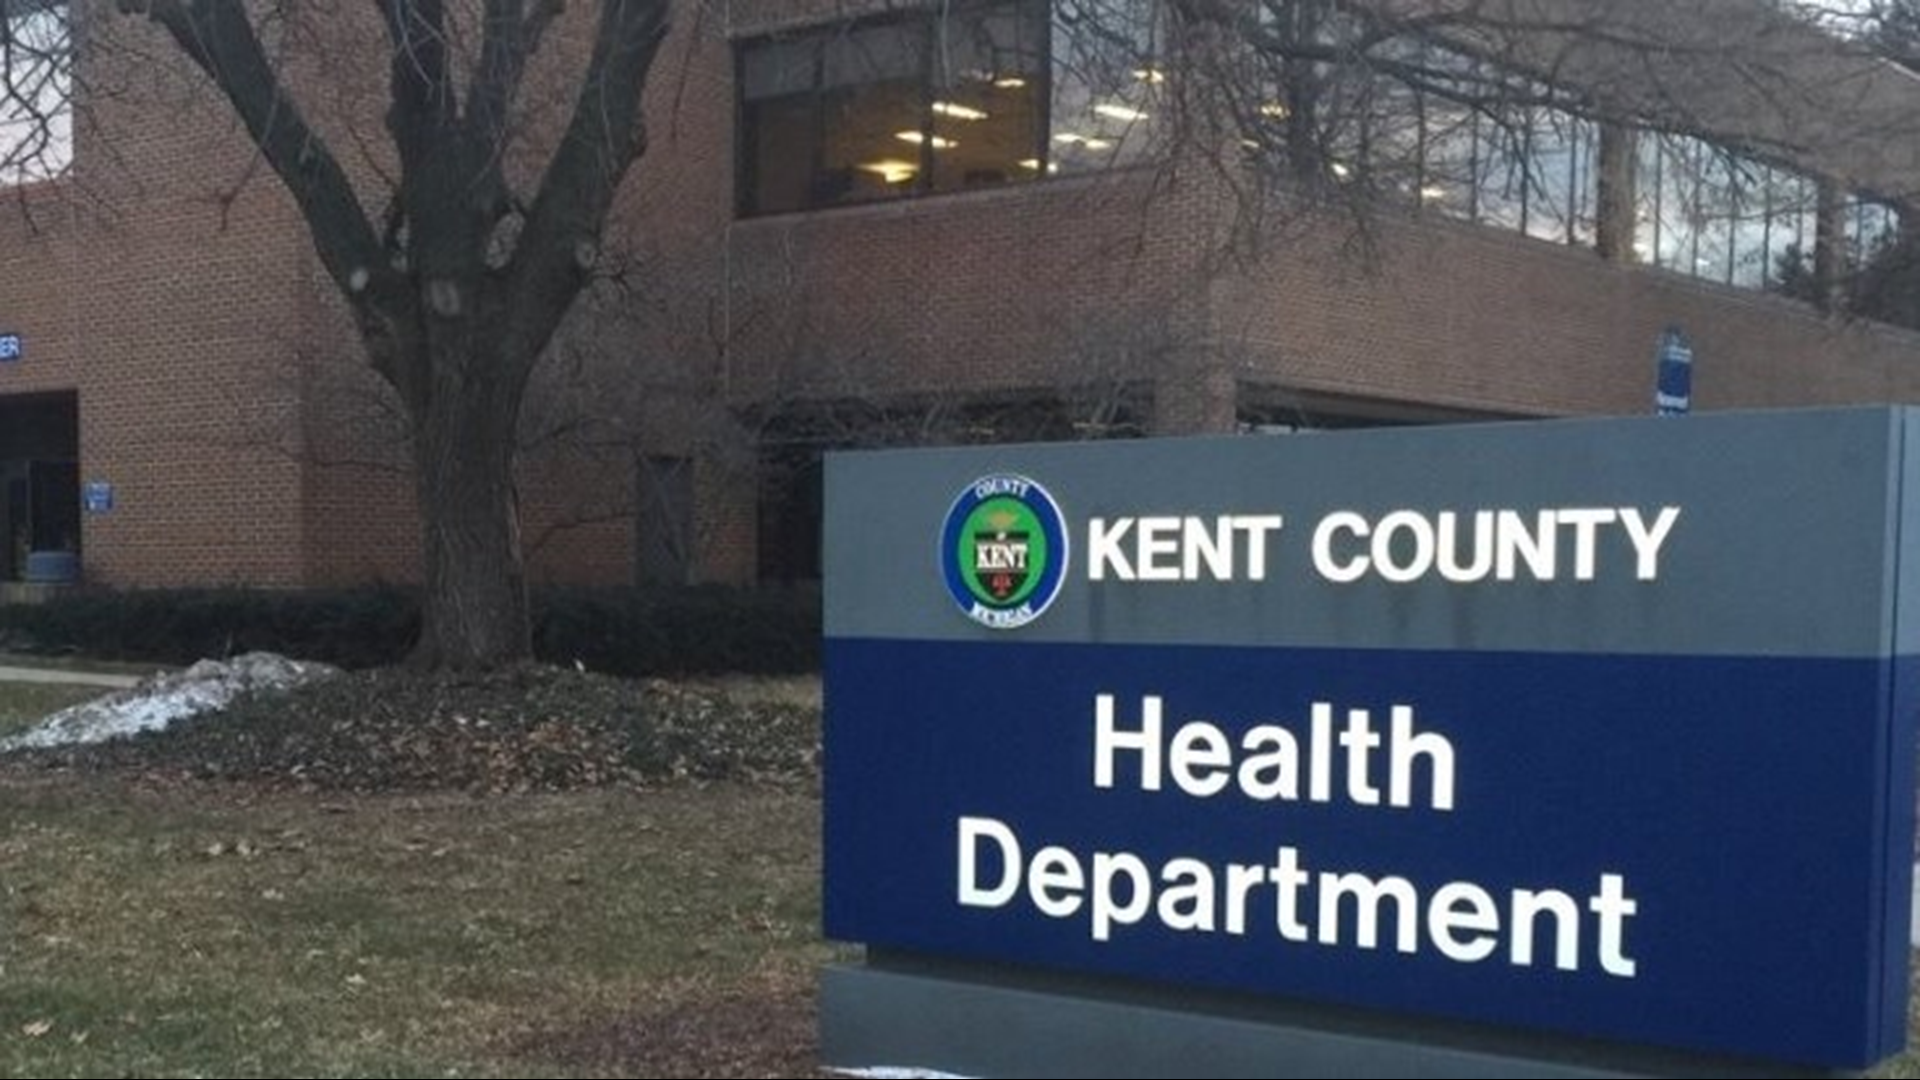 The Kent County Health Department says we should prepare for our new normal, as the curve is flattened but the peak number of cases has been reached yet